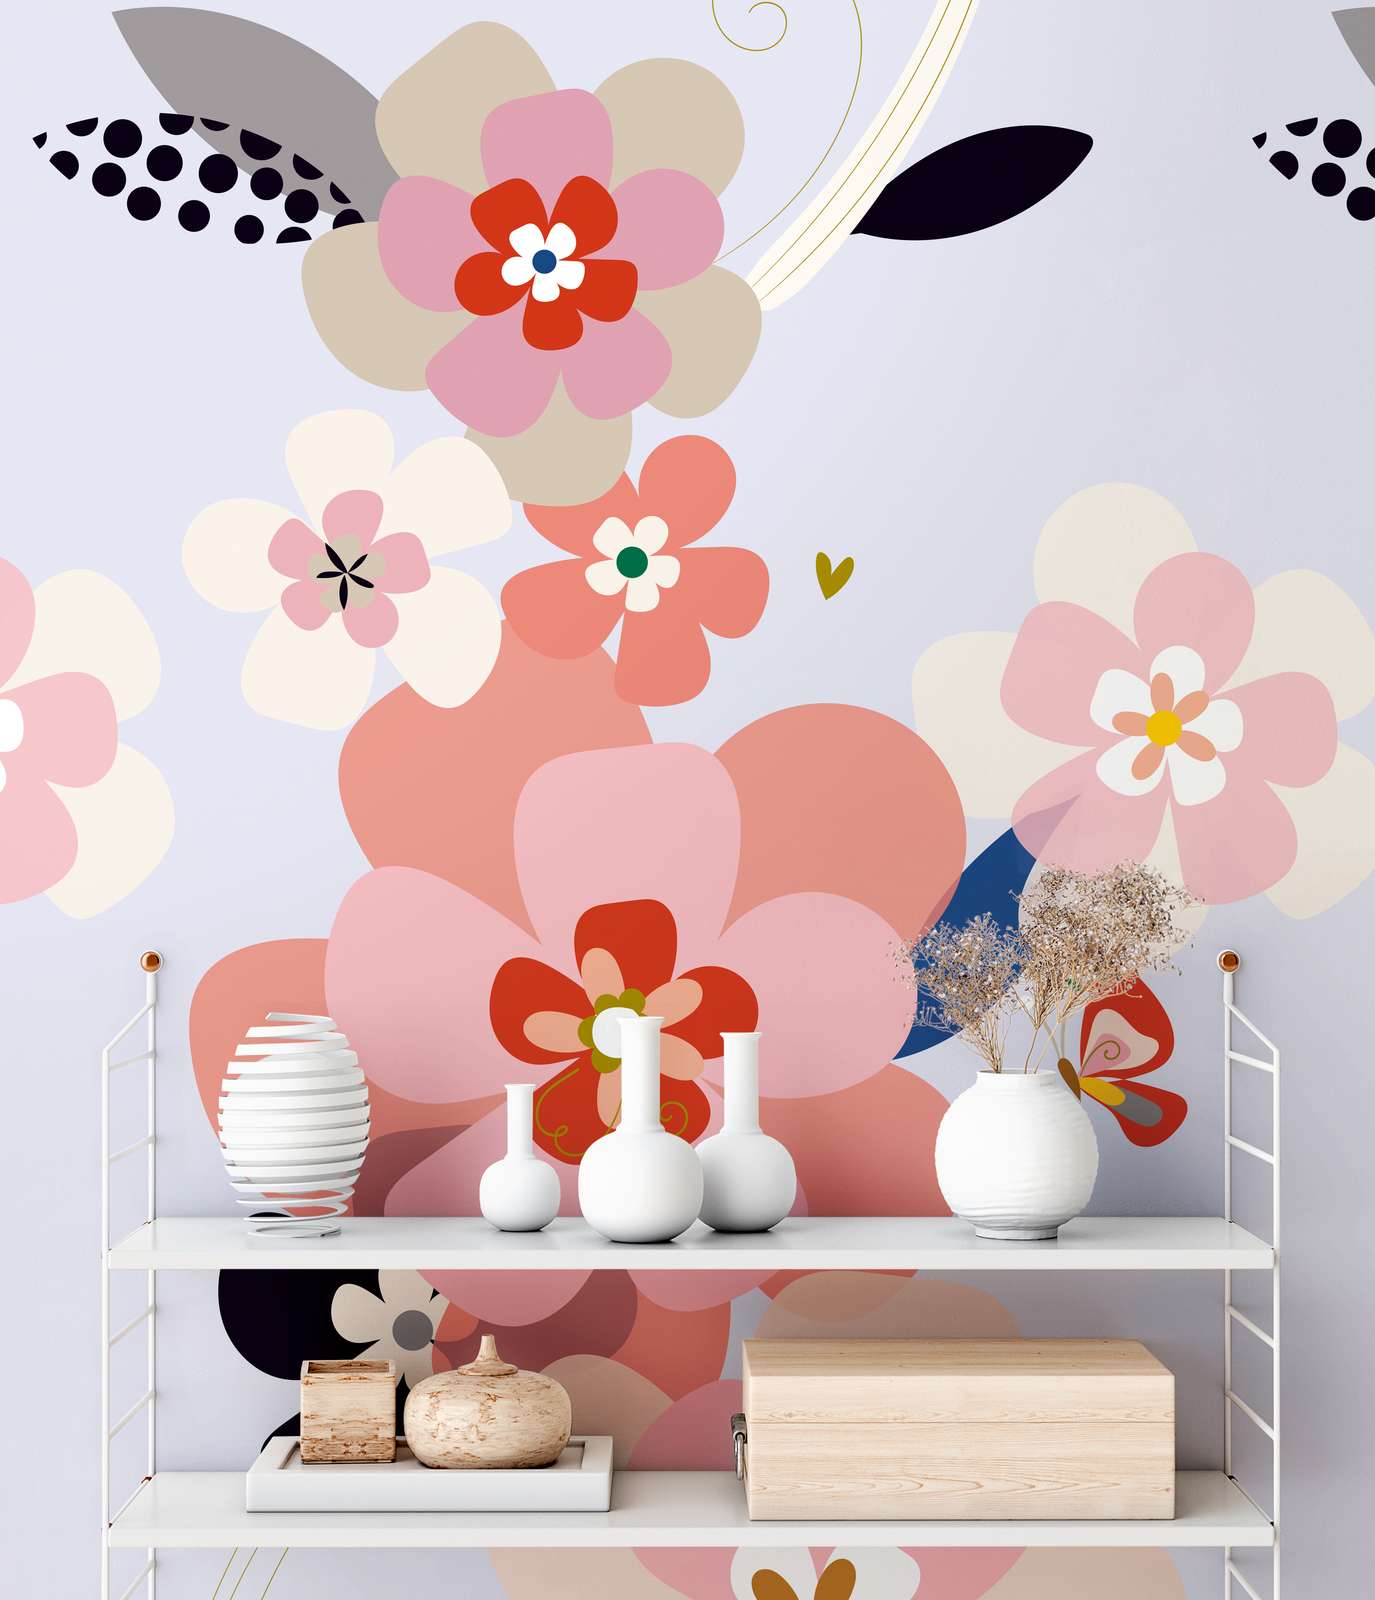             Large floral motif wallpaper in minimalist style - multicoloured, pink, lilac
        